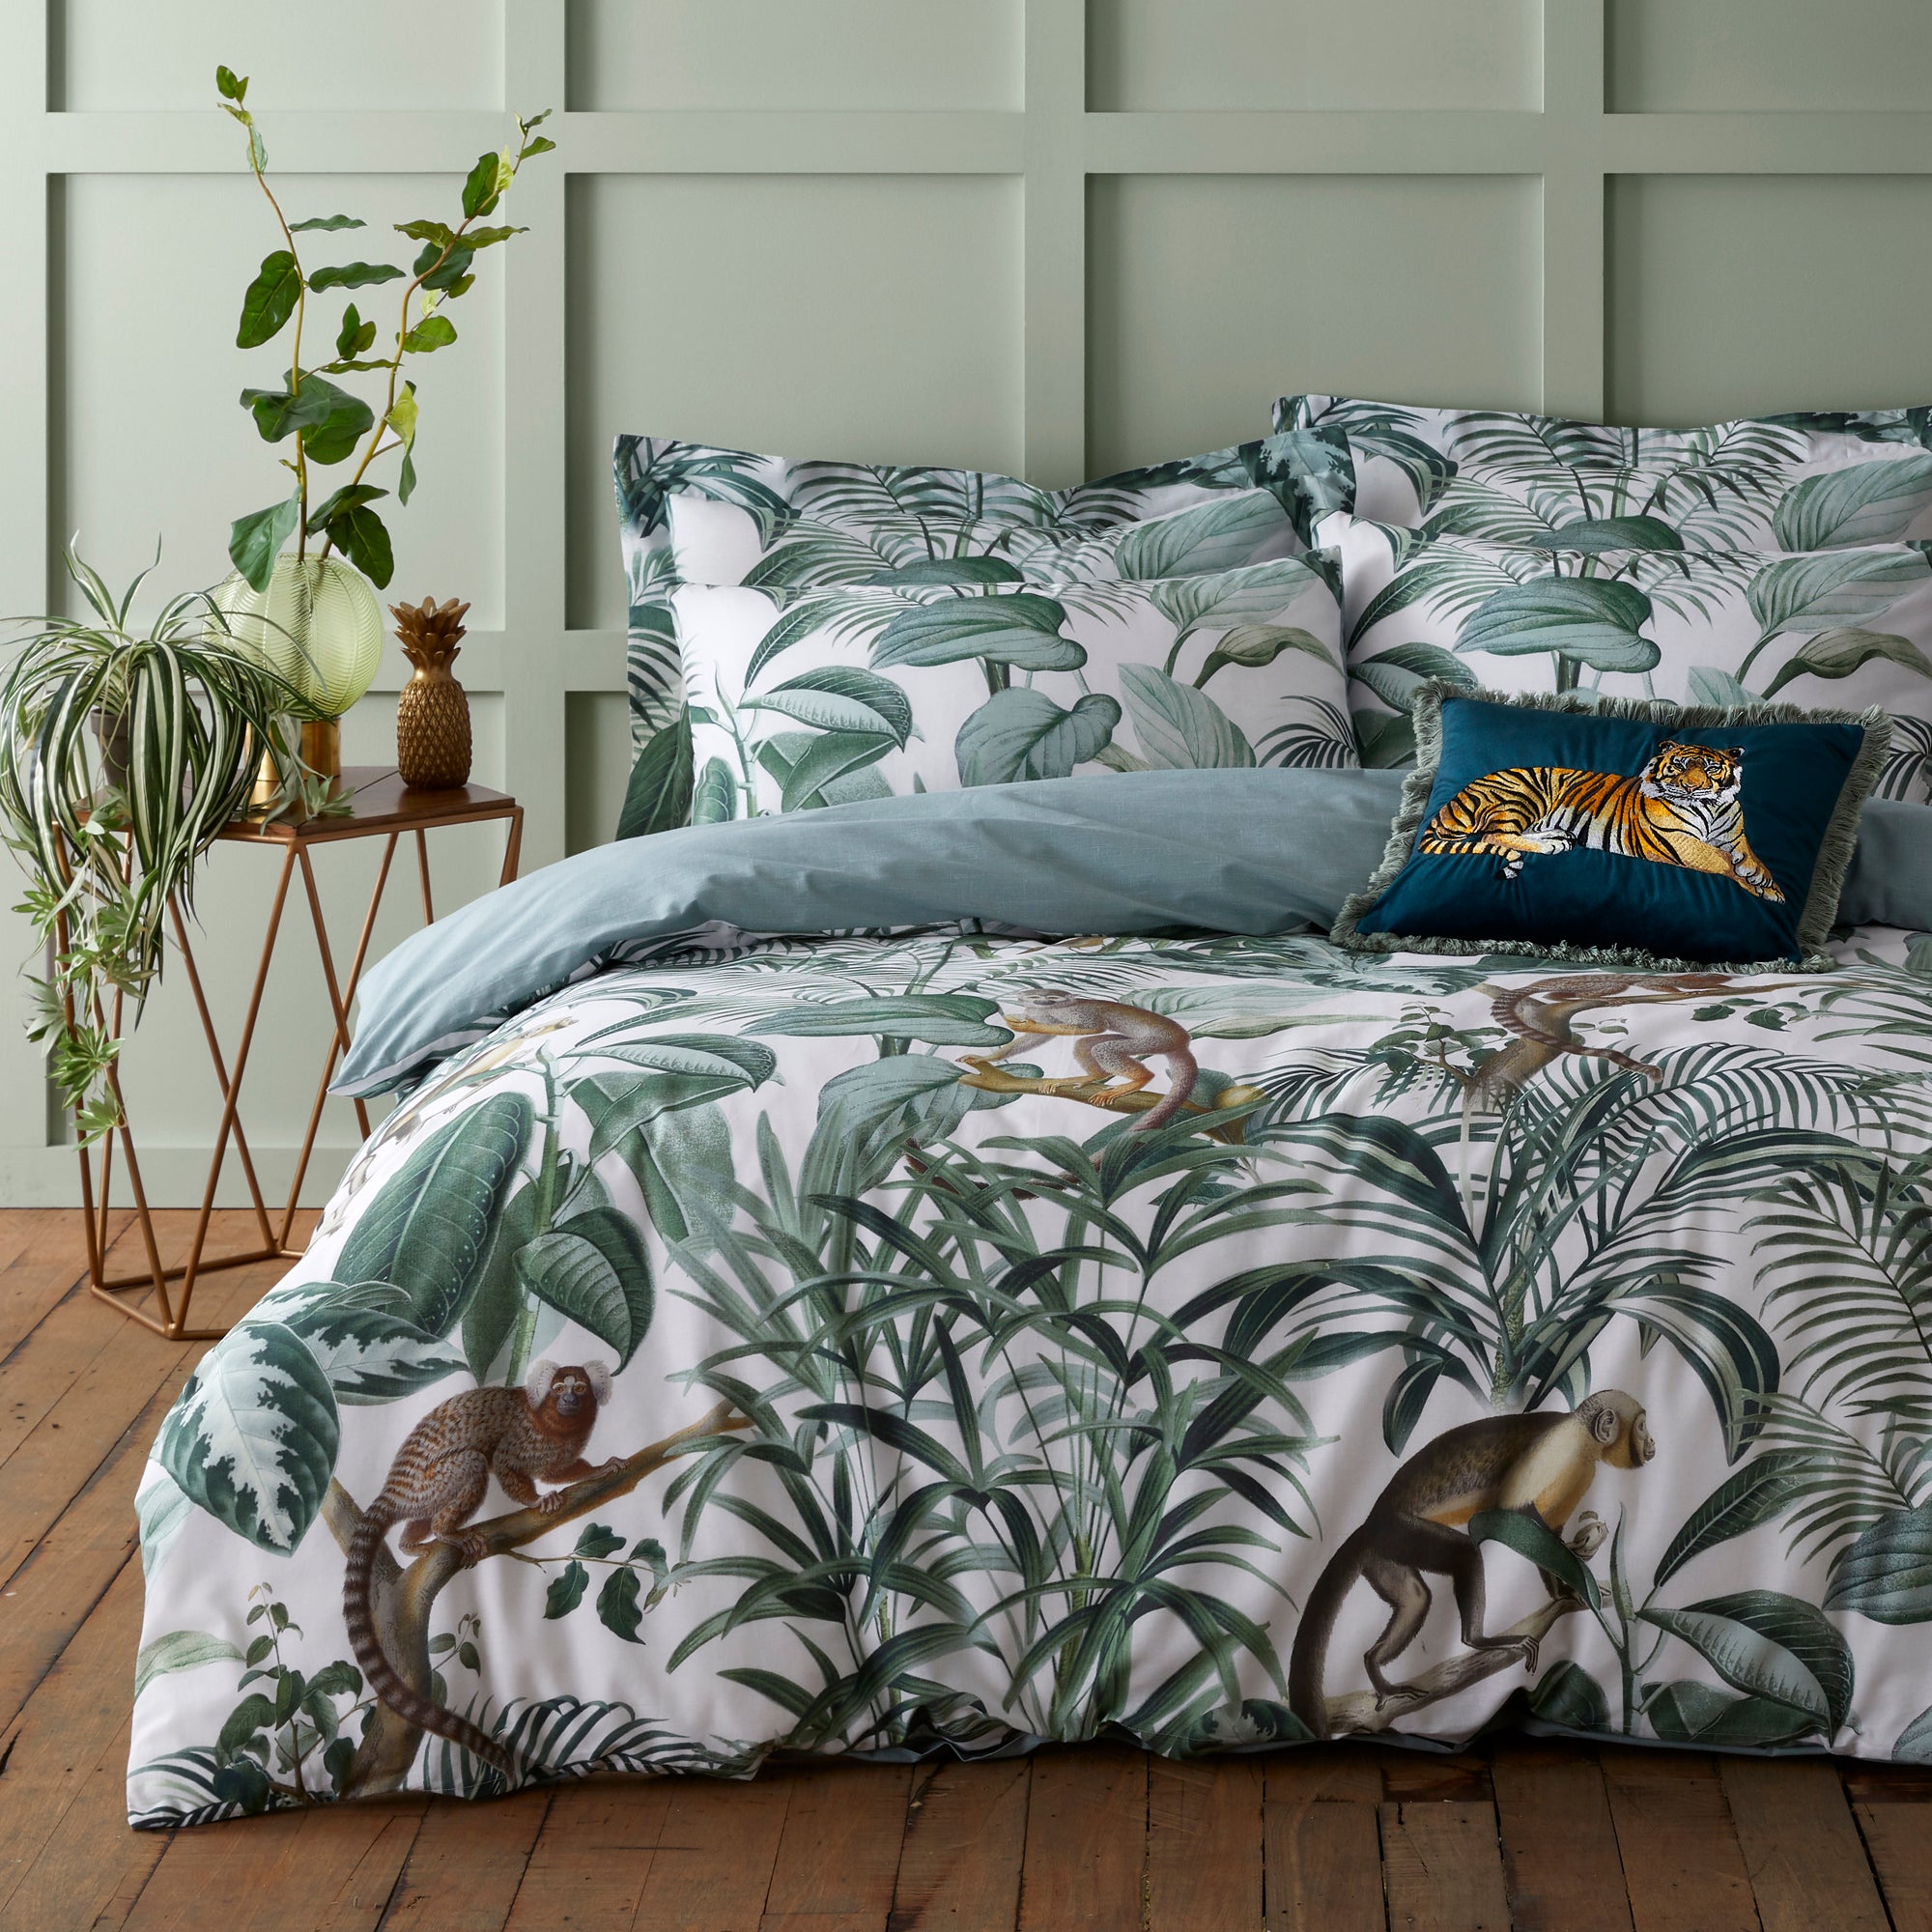 Photo of Jungle green 100 cotton reversible duvet cover and pillowcase set green- white and brown